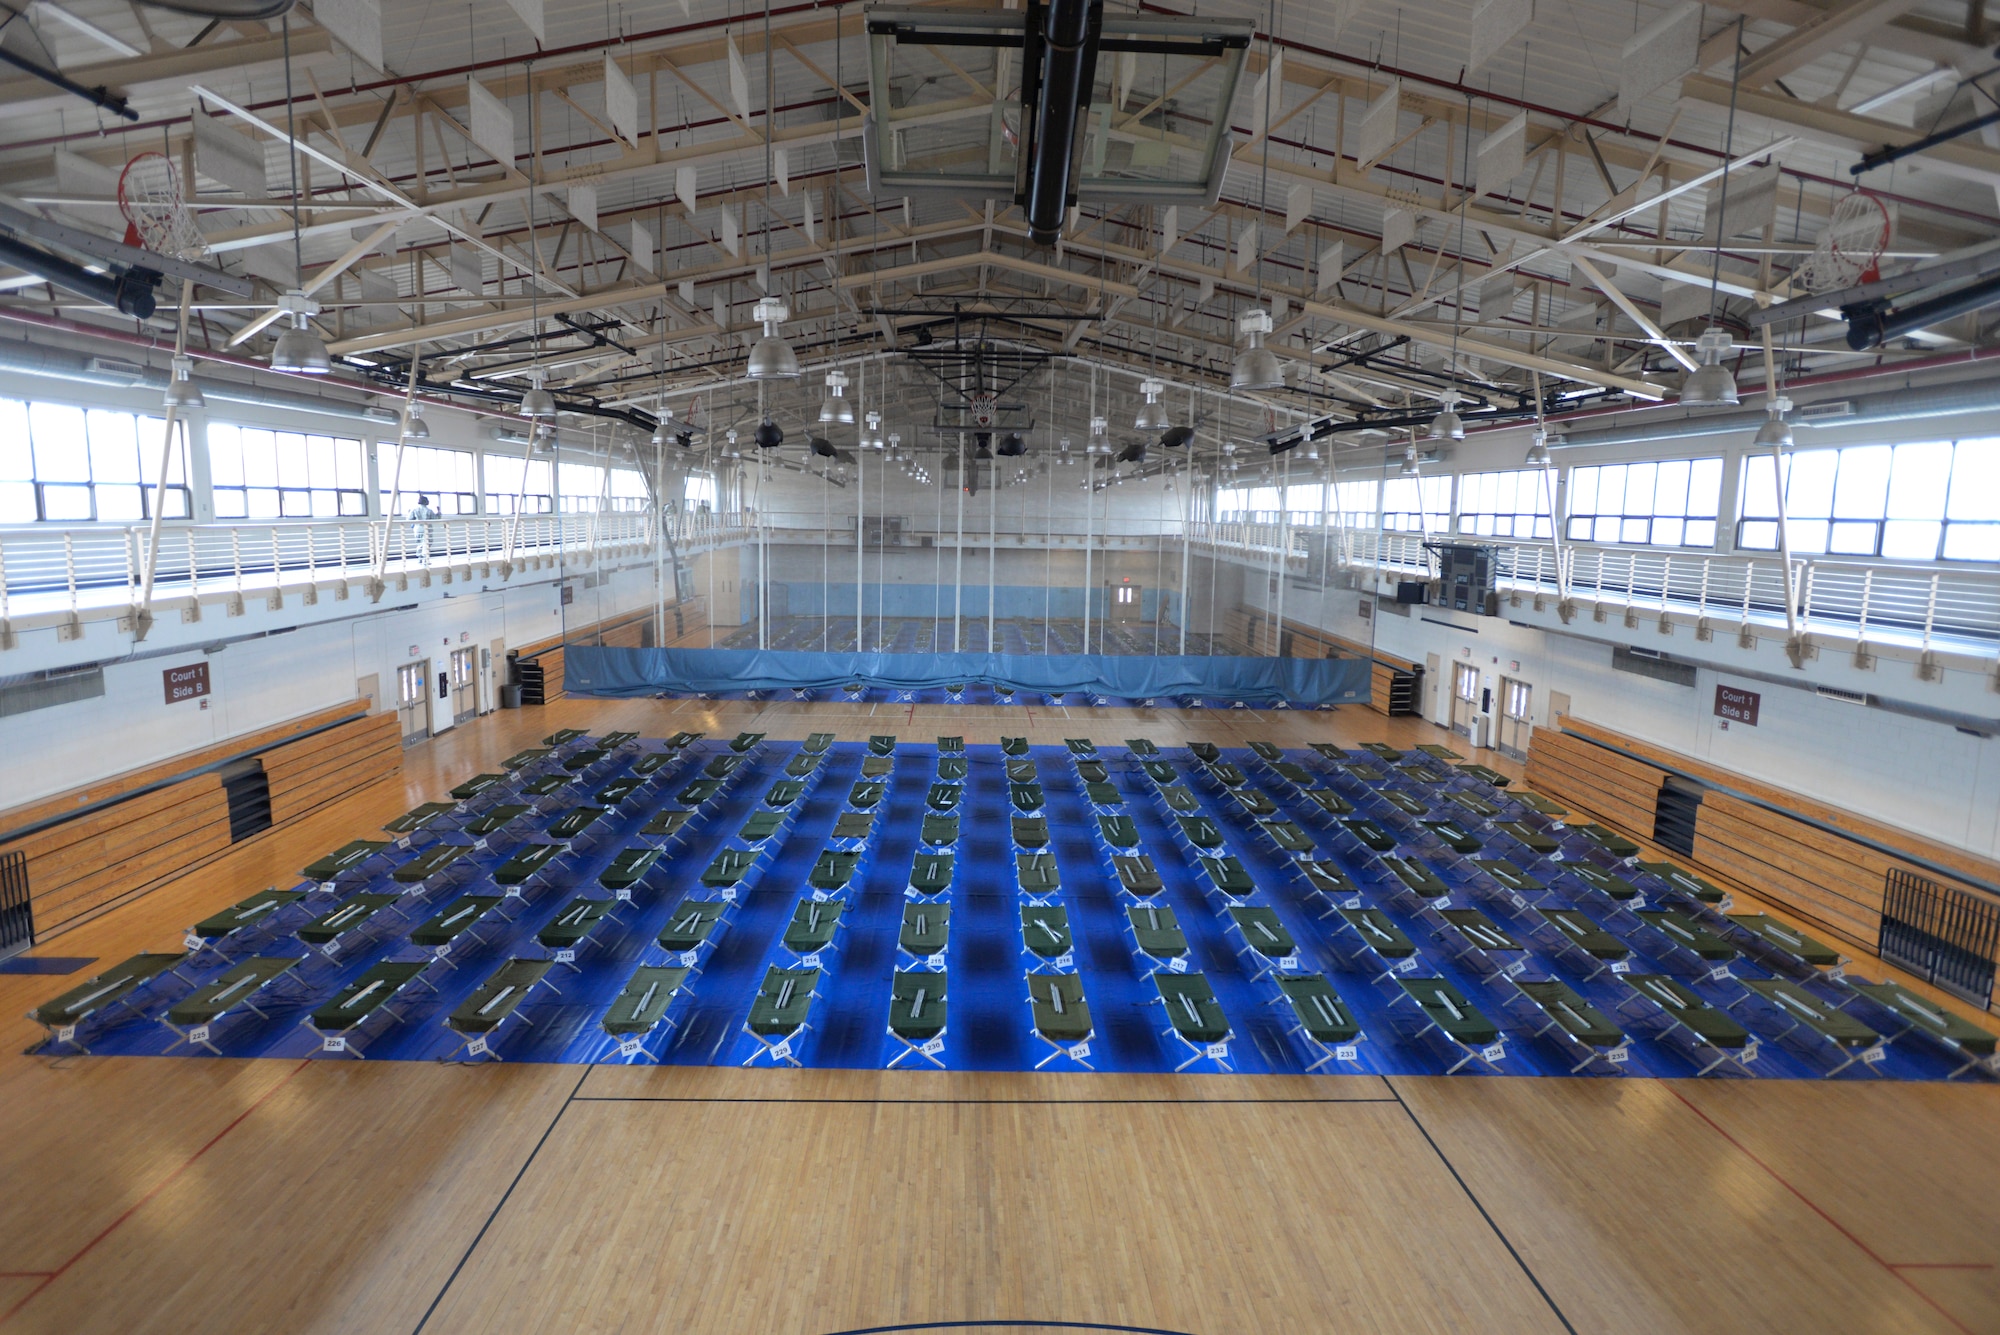 Cots are set up in the Fitness Center to provide follow-on forces during operational readiness exercise Beverly Midnight 15-01 March 2, 2015, at Osan Air Base, Republic of Korea. The cots were used to help receive and sustain more than 200 follow-on forces on base during the exercise. (U.S. Air Force photo by Senior Airman David Owsianka)